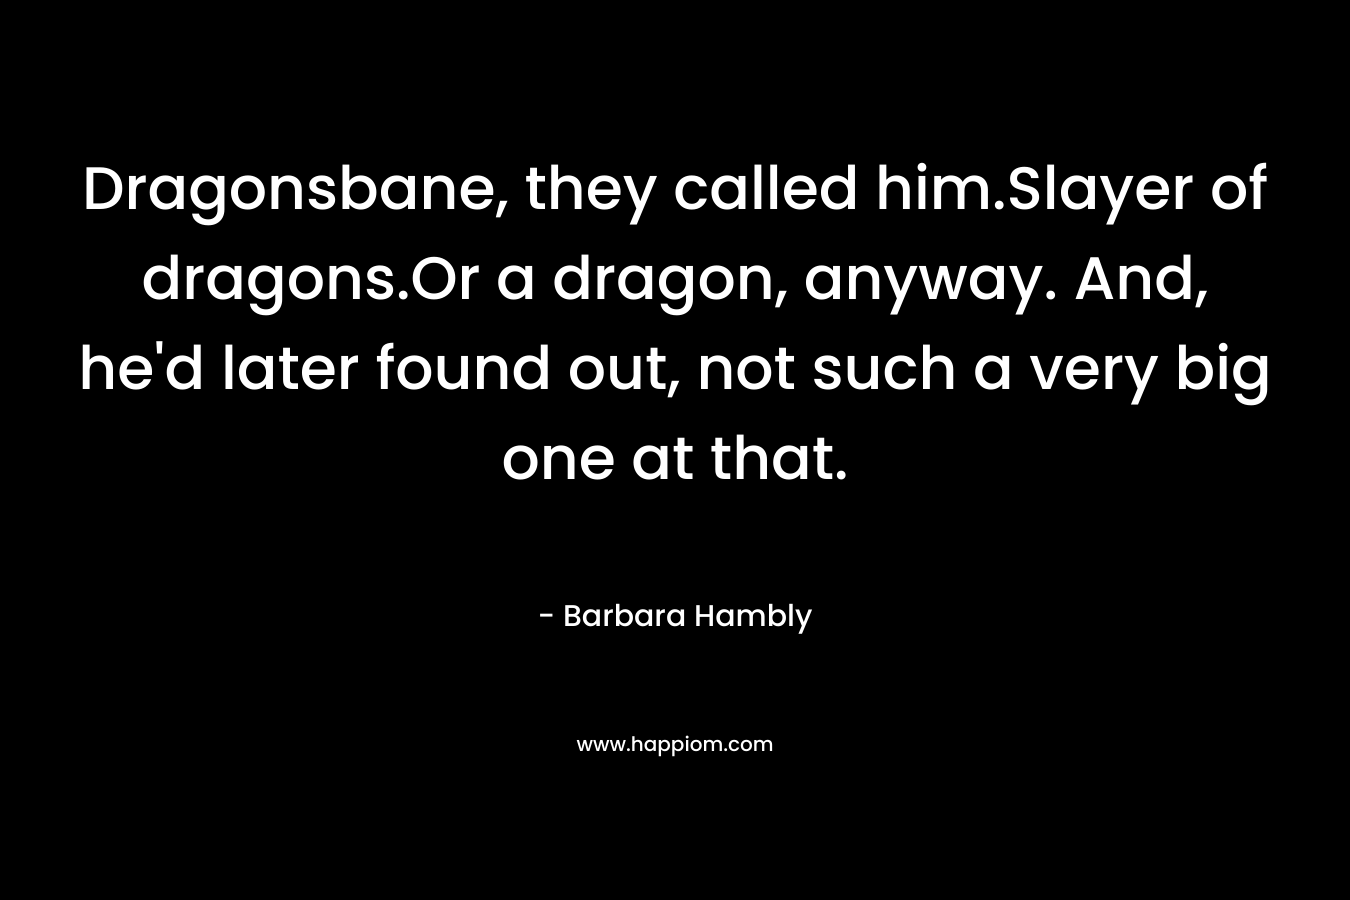 Dragonsbane, they called him.Slayer of dragons.Or a dragon, anyway. And, he'd later found out, not such a very big one at that.